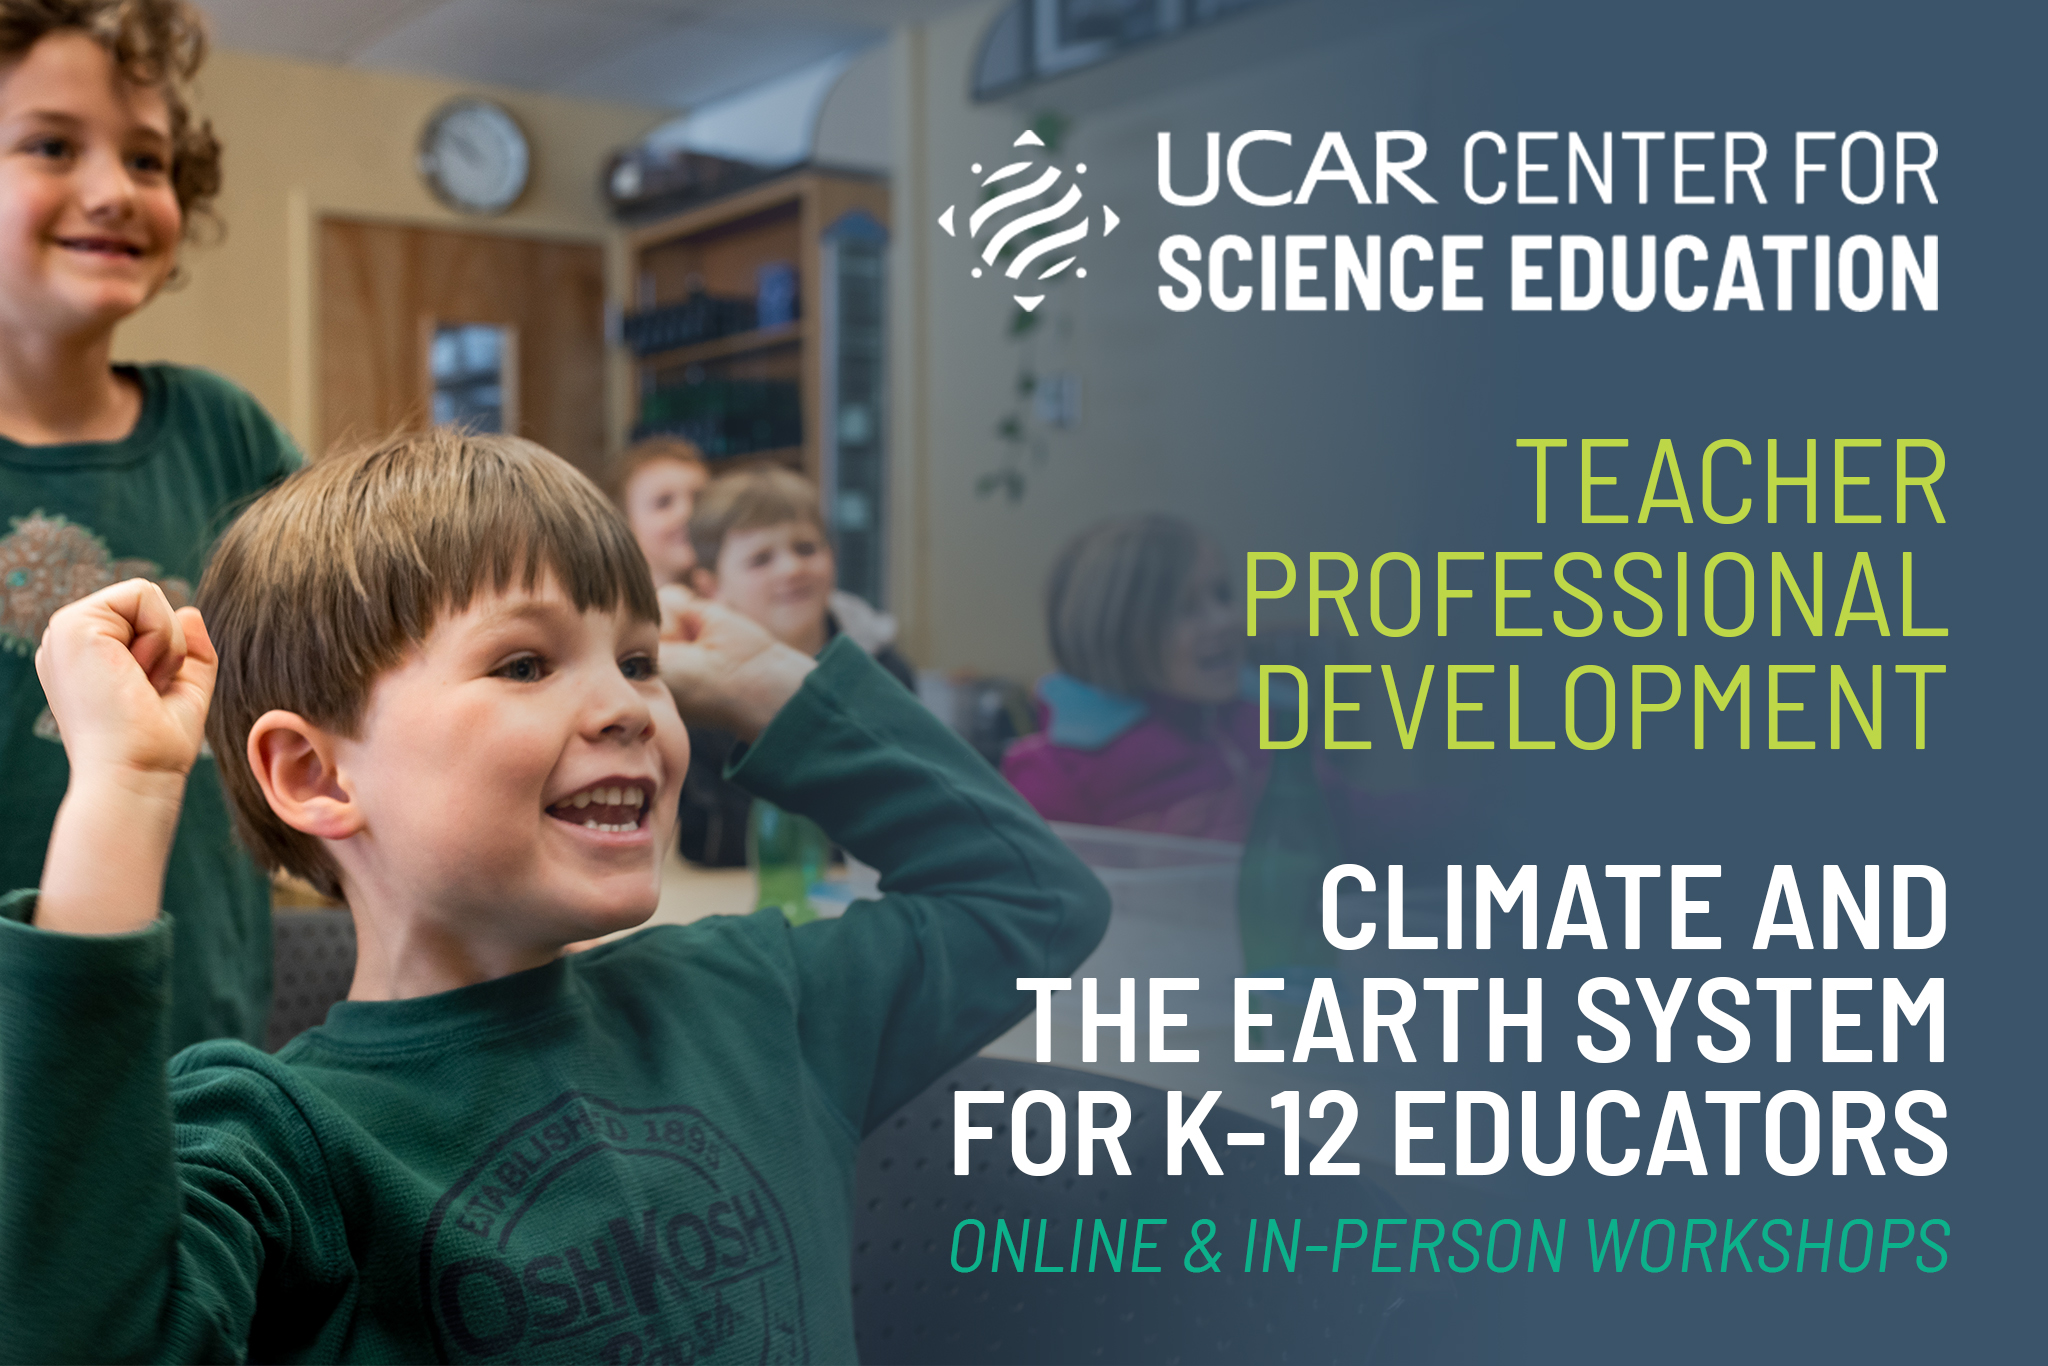 Excited child in a classroom with the UCAR Center for Science Education logo and title text that states: Teacher Professional Development, Climate and the Earth System for K-12 Educators, Online and In-person Workshops